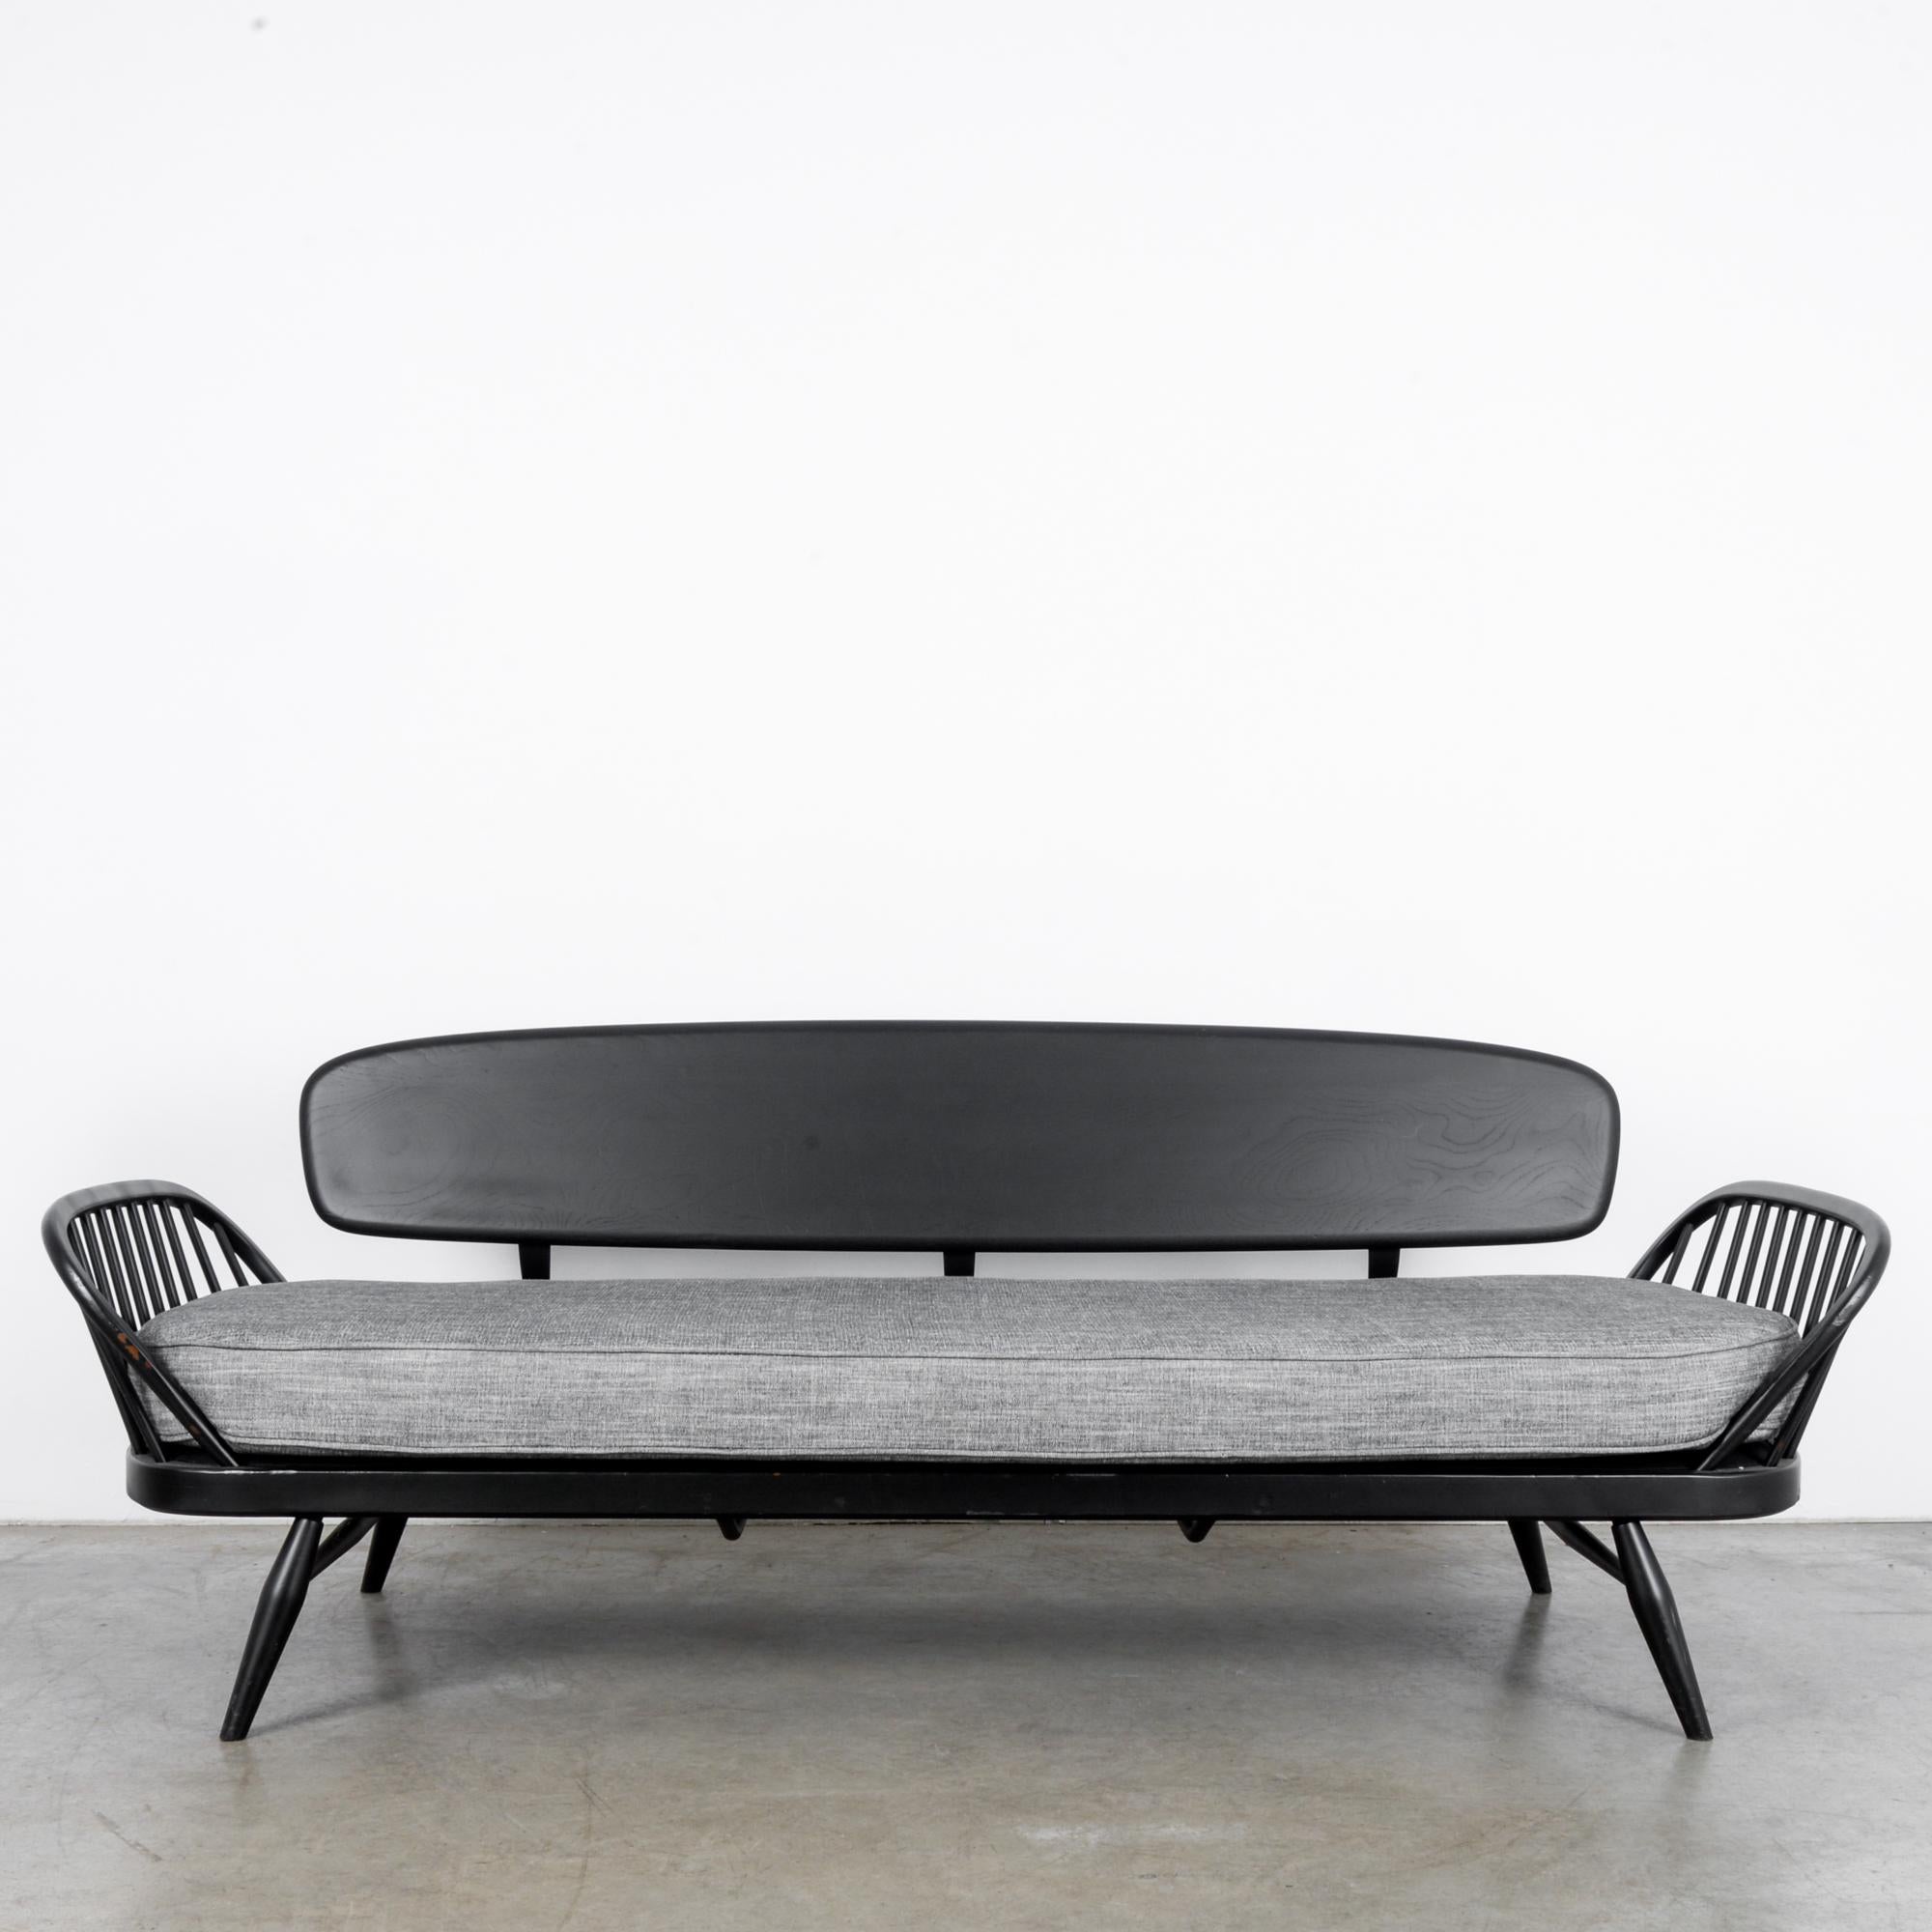 This sofa daybed designed by Lucian Ercolani was made in the United Kingdom, circa 1960. It comfortably sits three and also serves as a single bed for an overnight guest. Supported on splayed, turned legs, the daybed features curved armrests on the